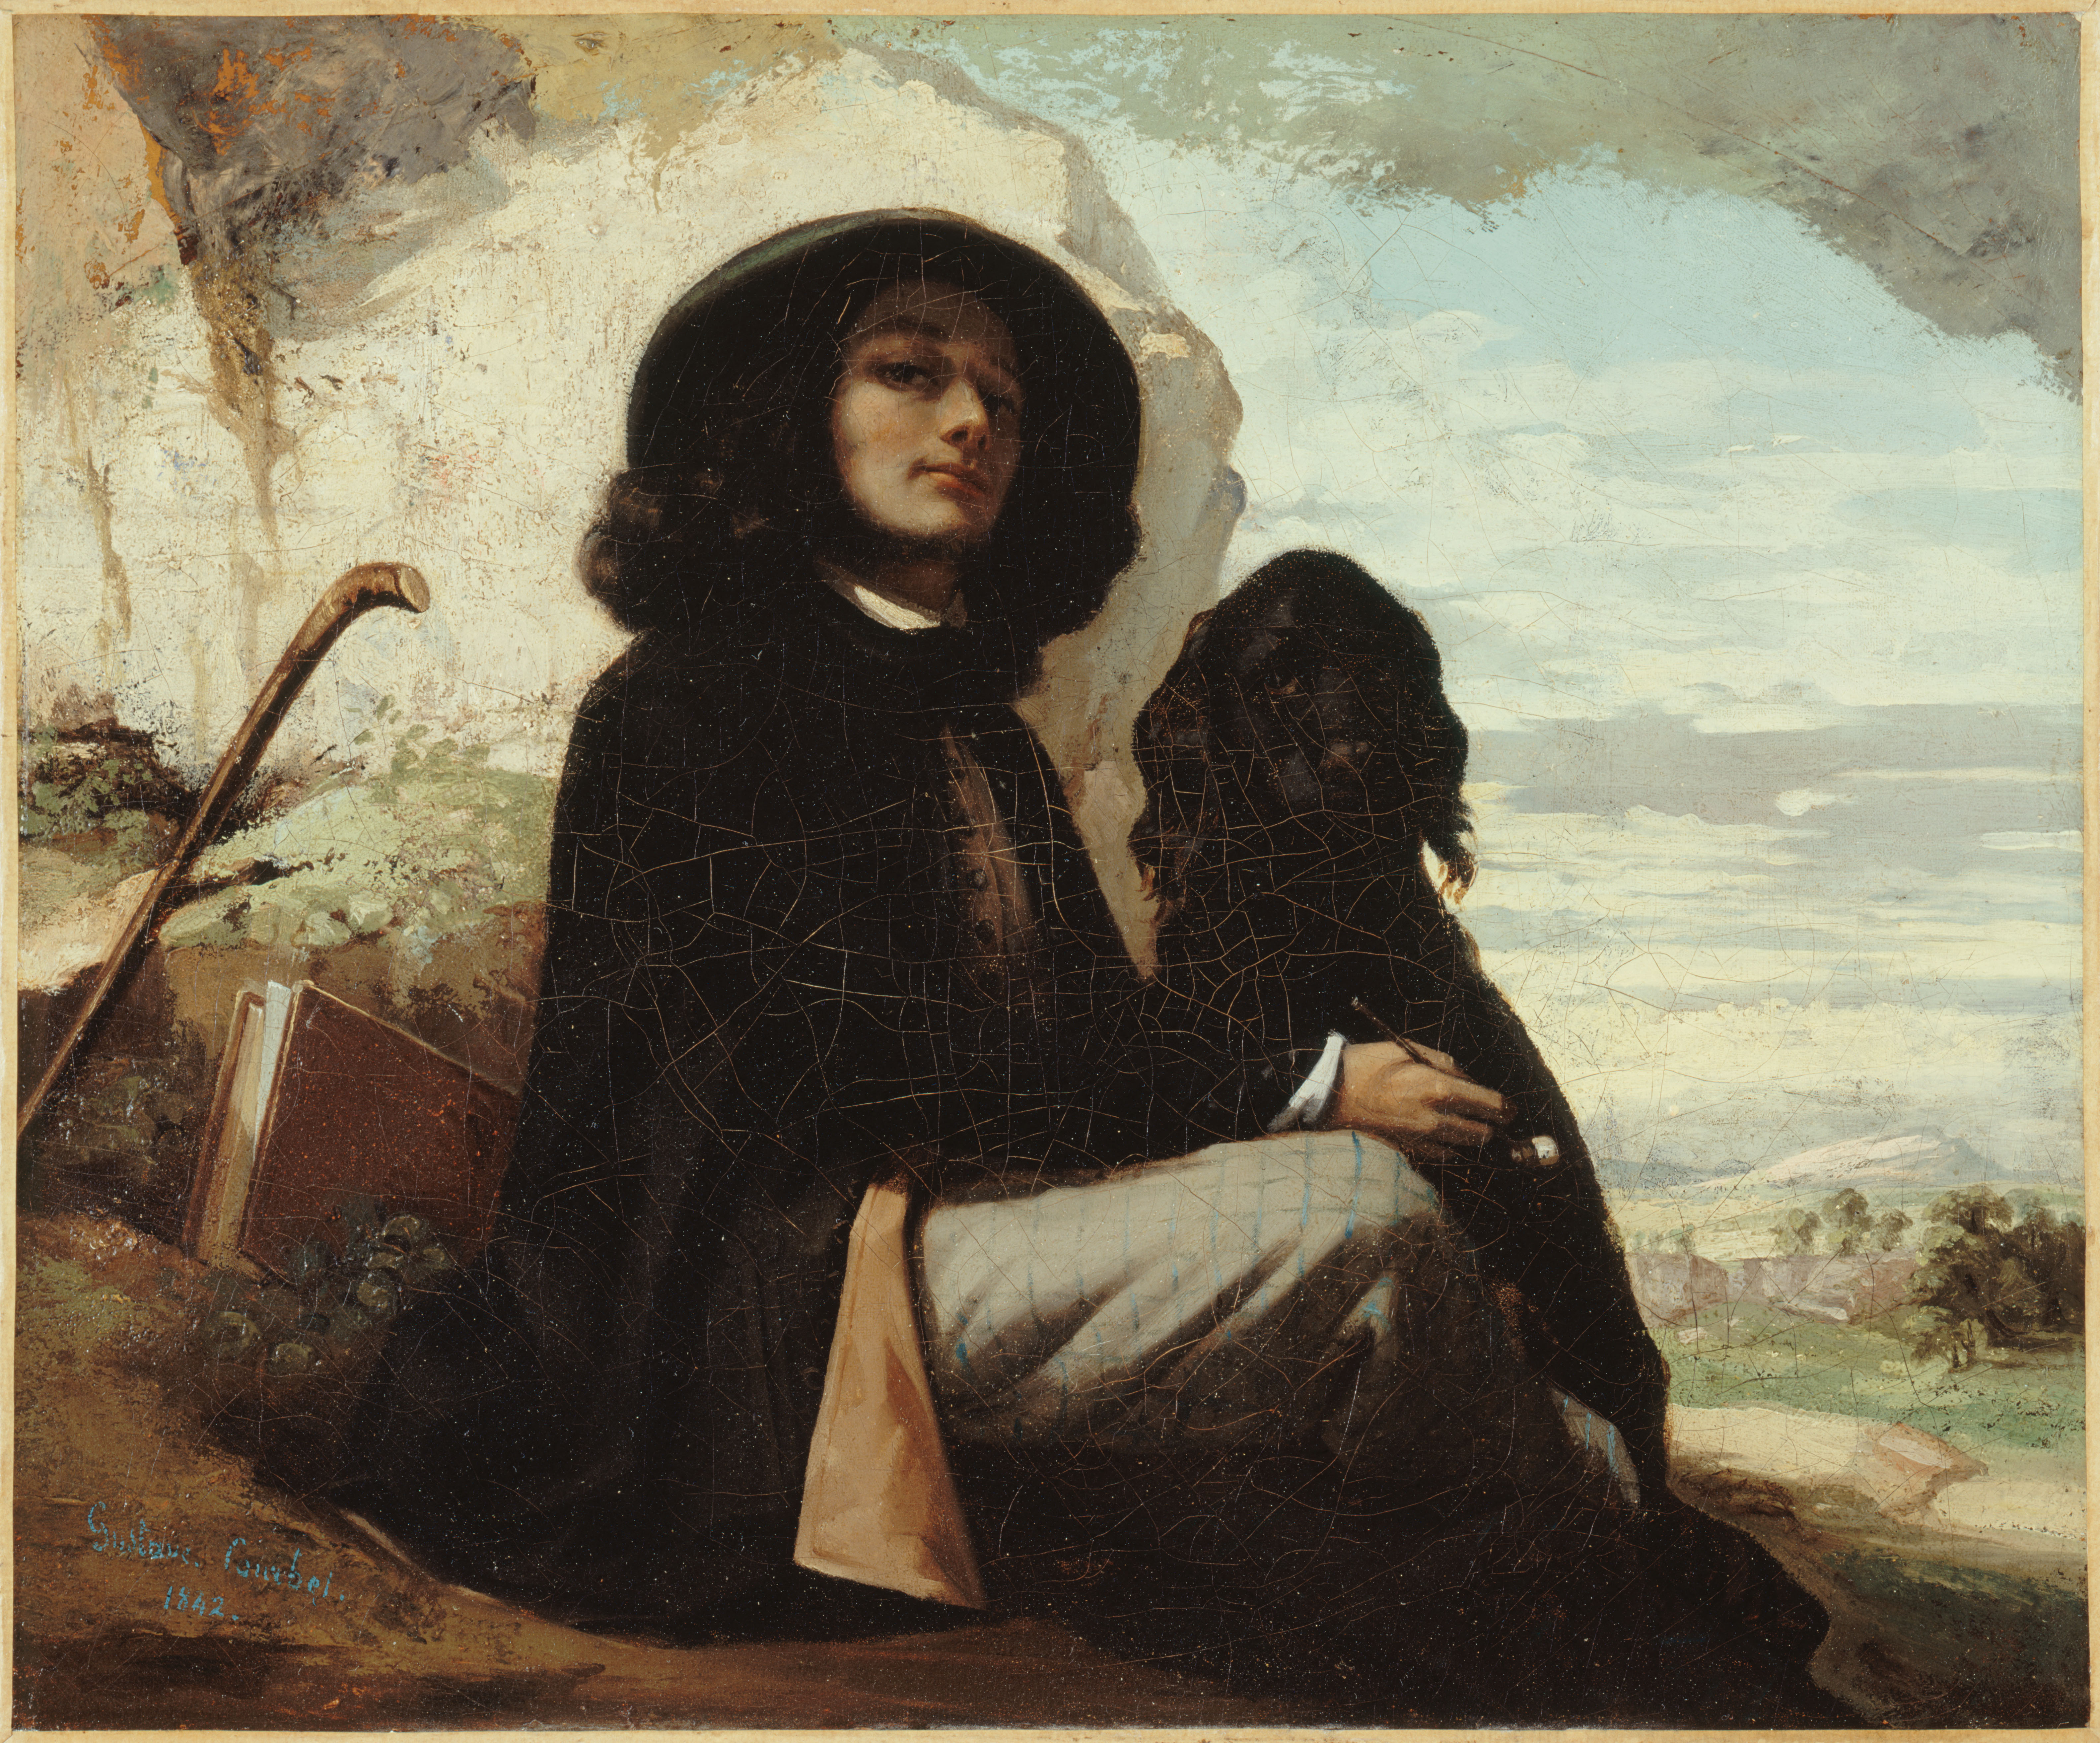 0001_Gustave Courbet_Self-Portrait with a Black Dog 썸네일